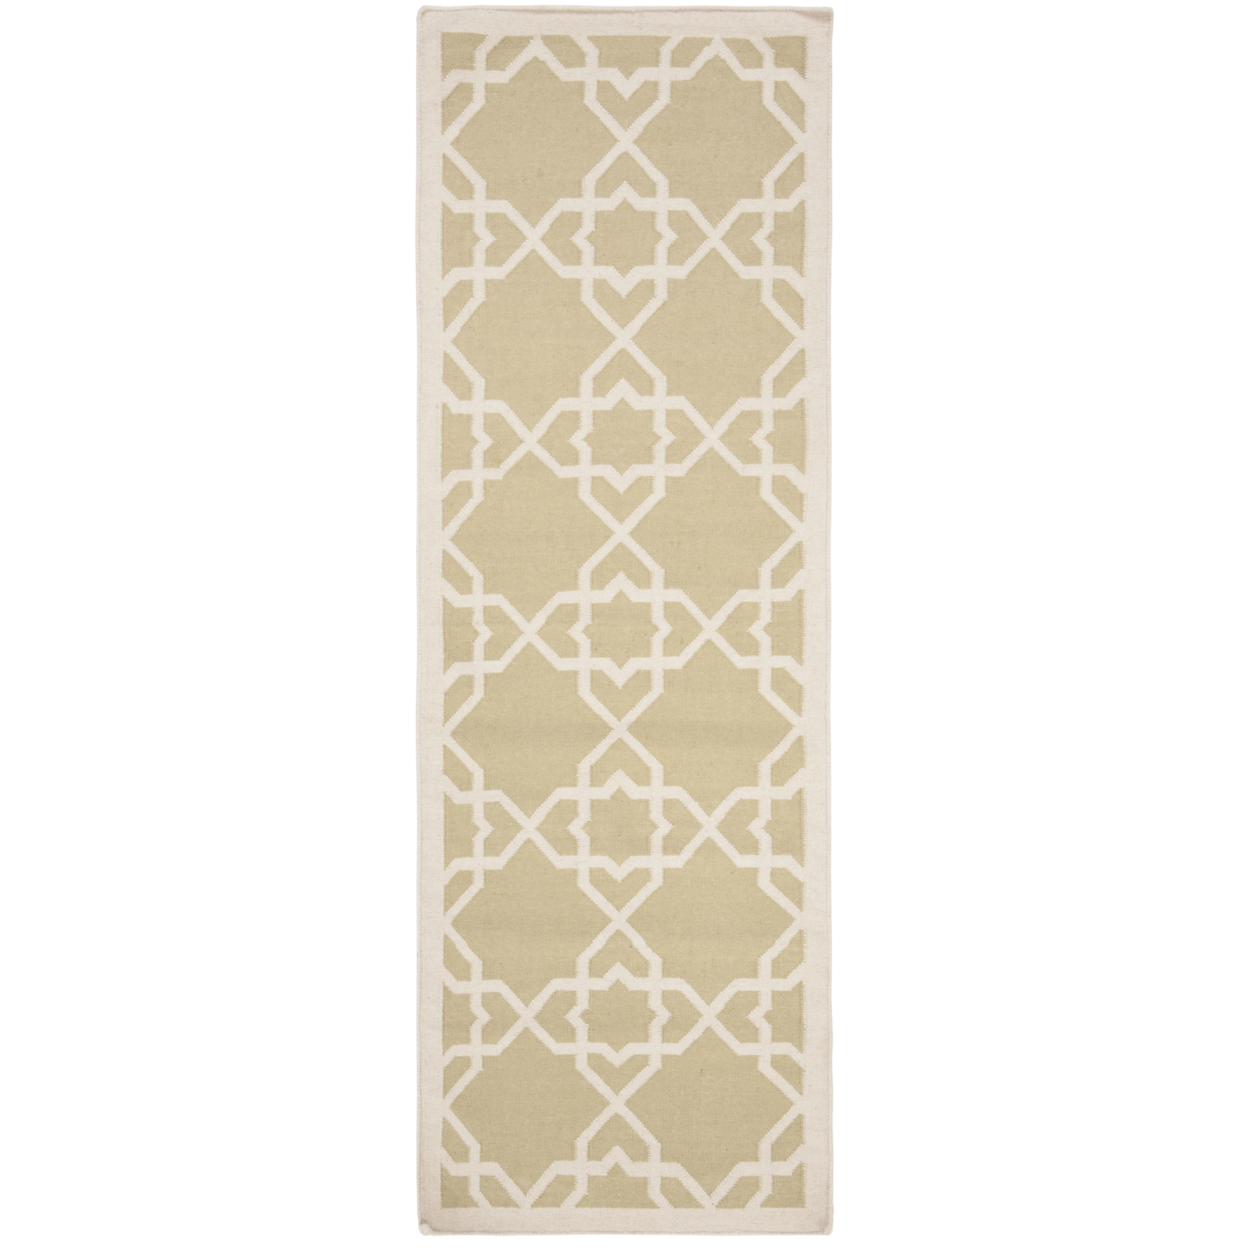 SAFAVIEH Dhurries DHU548A Handwoven Olive / Ivory Rug - 2' 6 X 8'